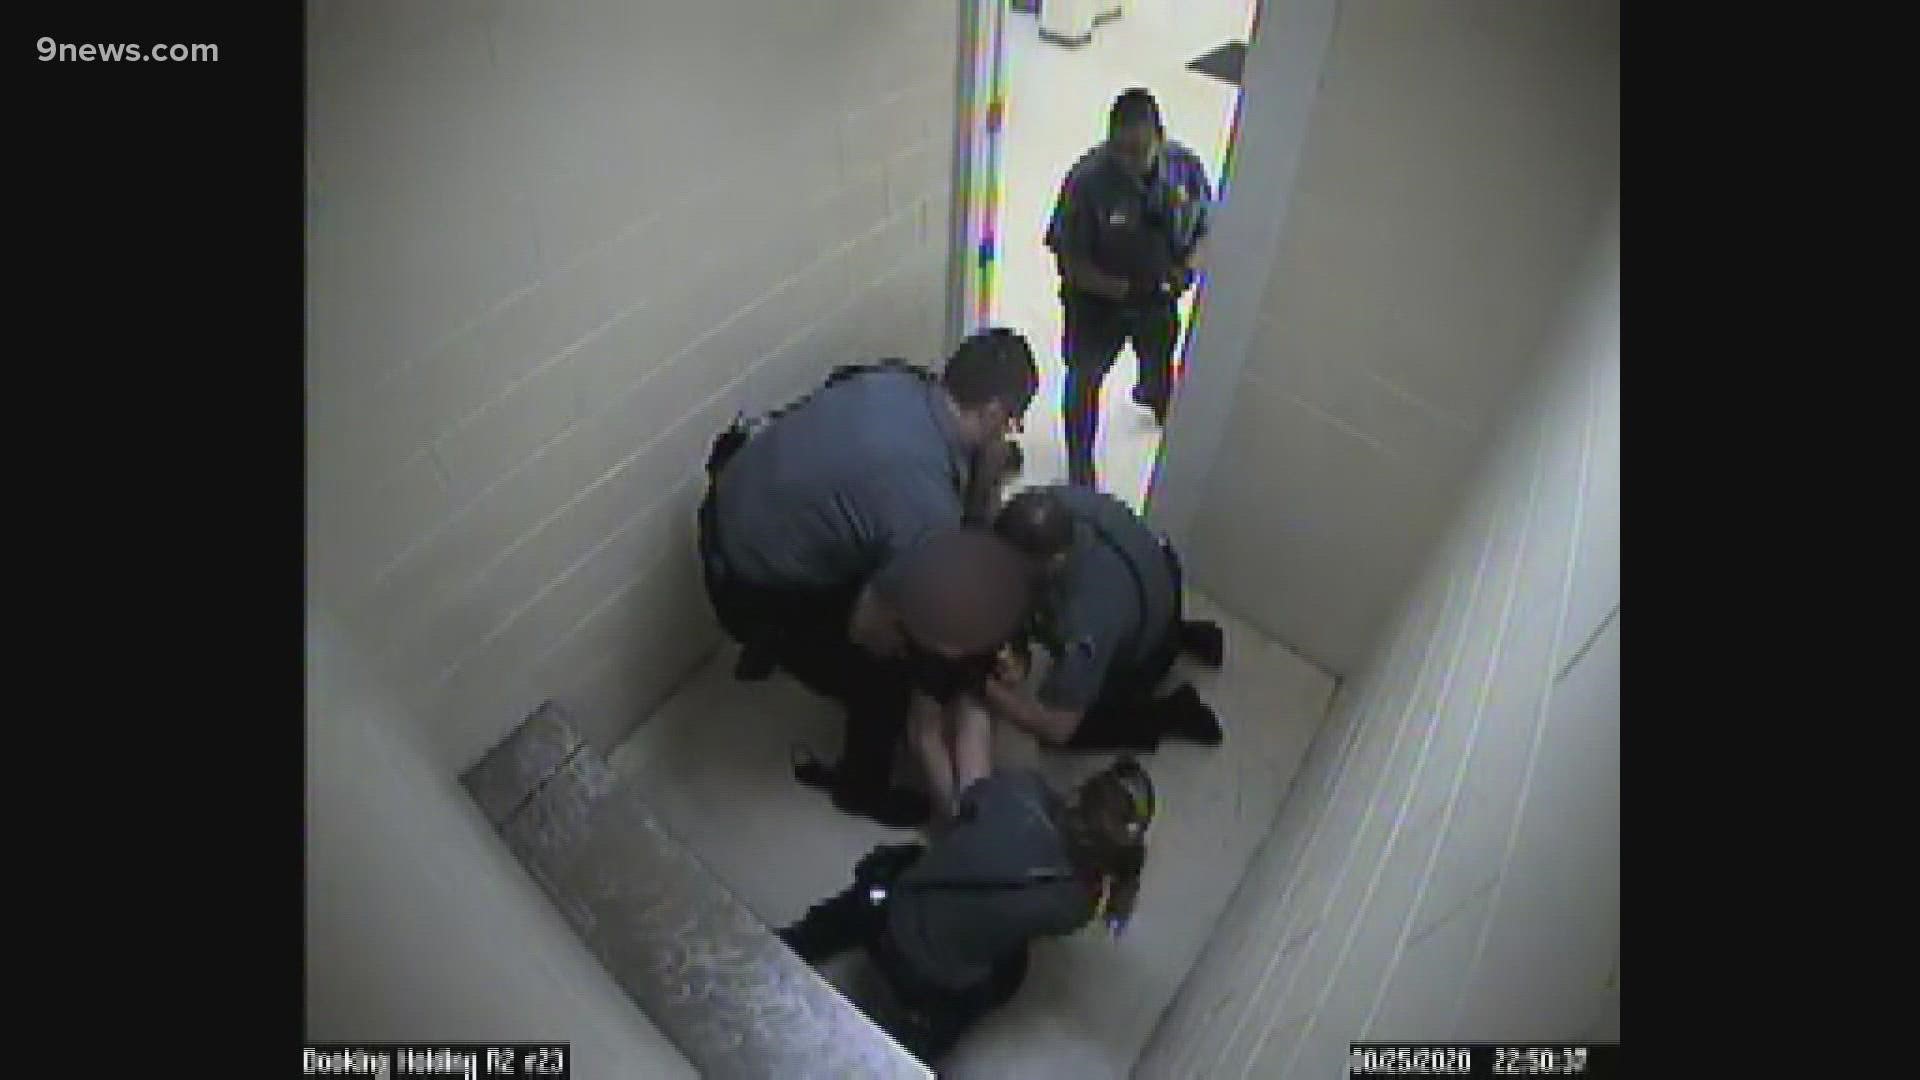 An Adams County deputy was found not guilty of assault on handcuffed inmate. After, the DA threw out failure to intervene charges against two other deputies.